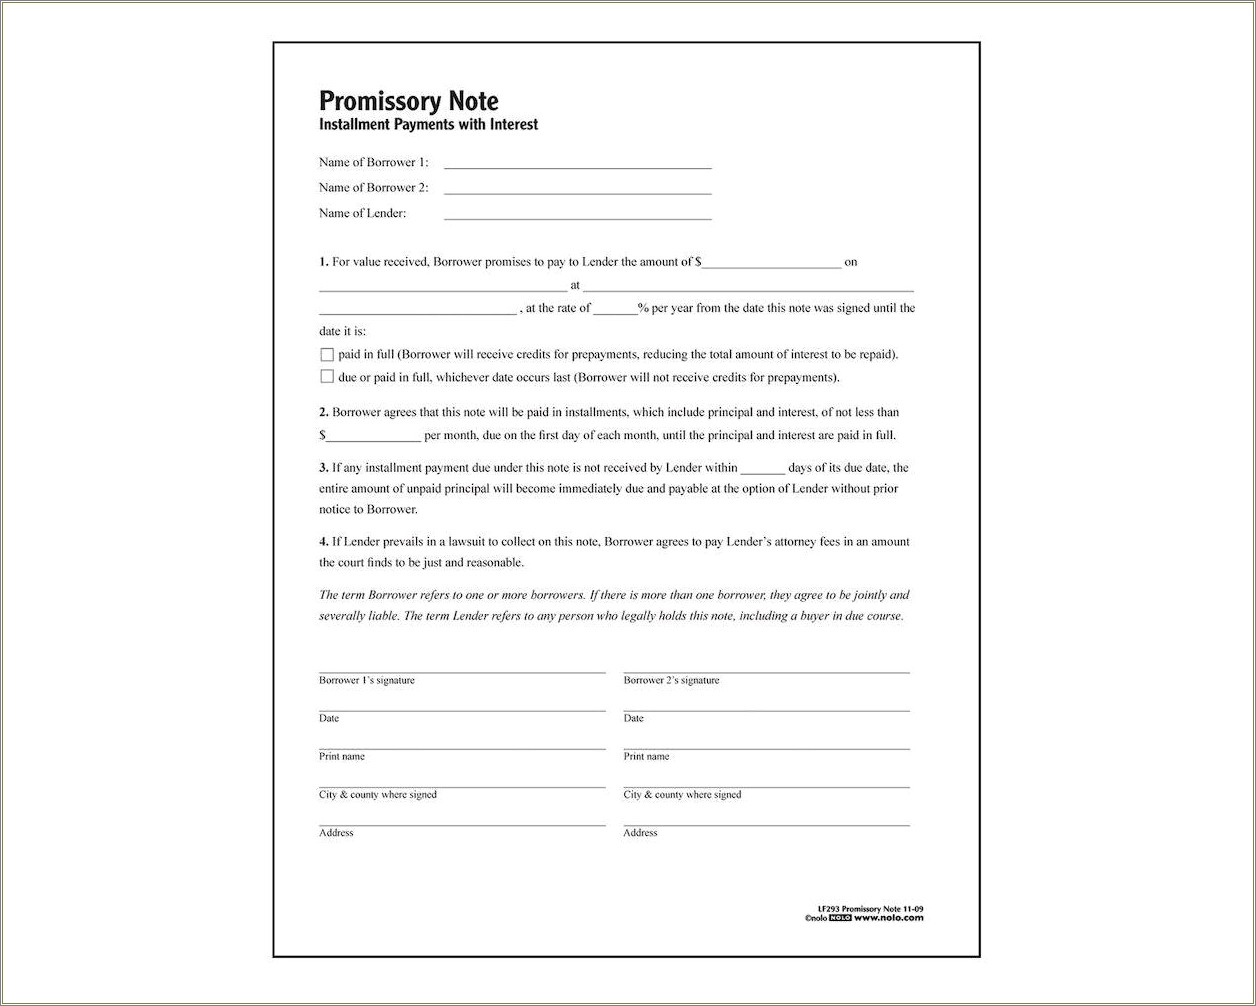 Completely Free Legal Primissory Note Template